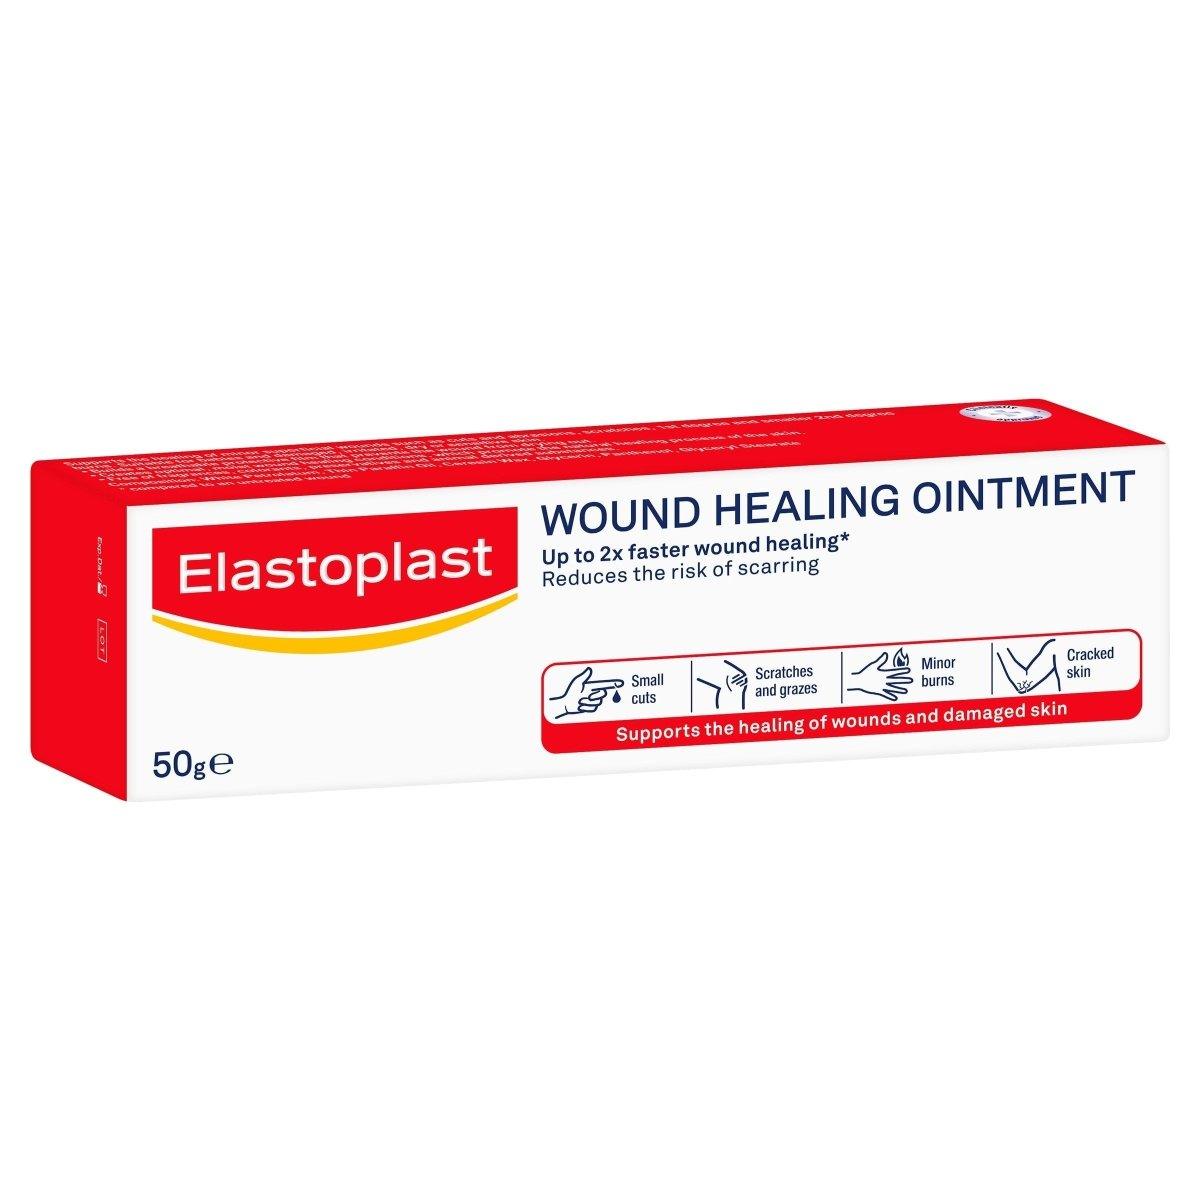 Elastoplast First Aid Healing Ointment - Rightangled